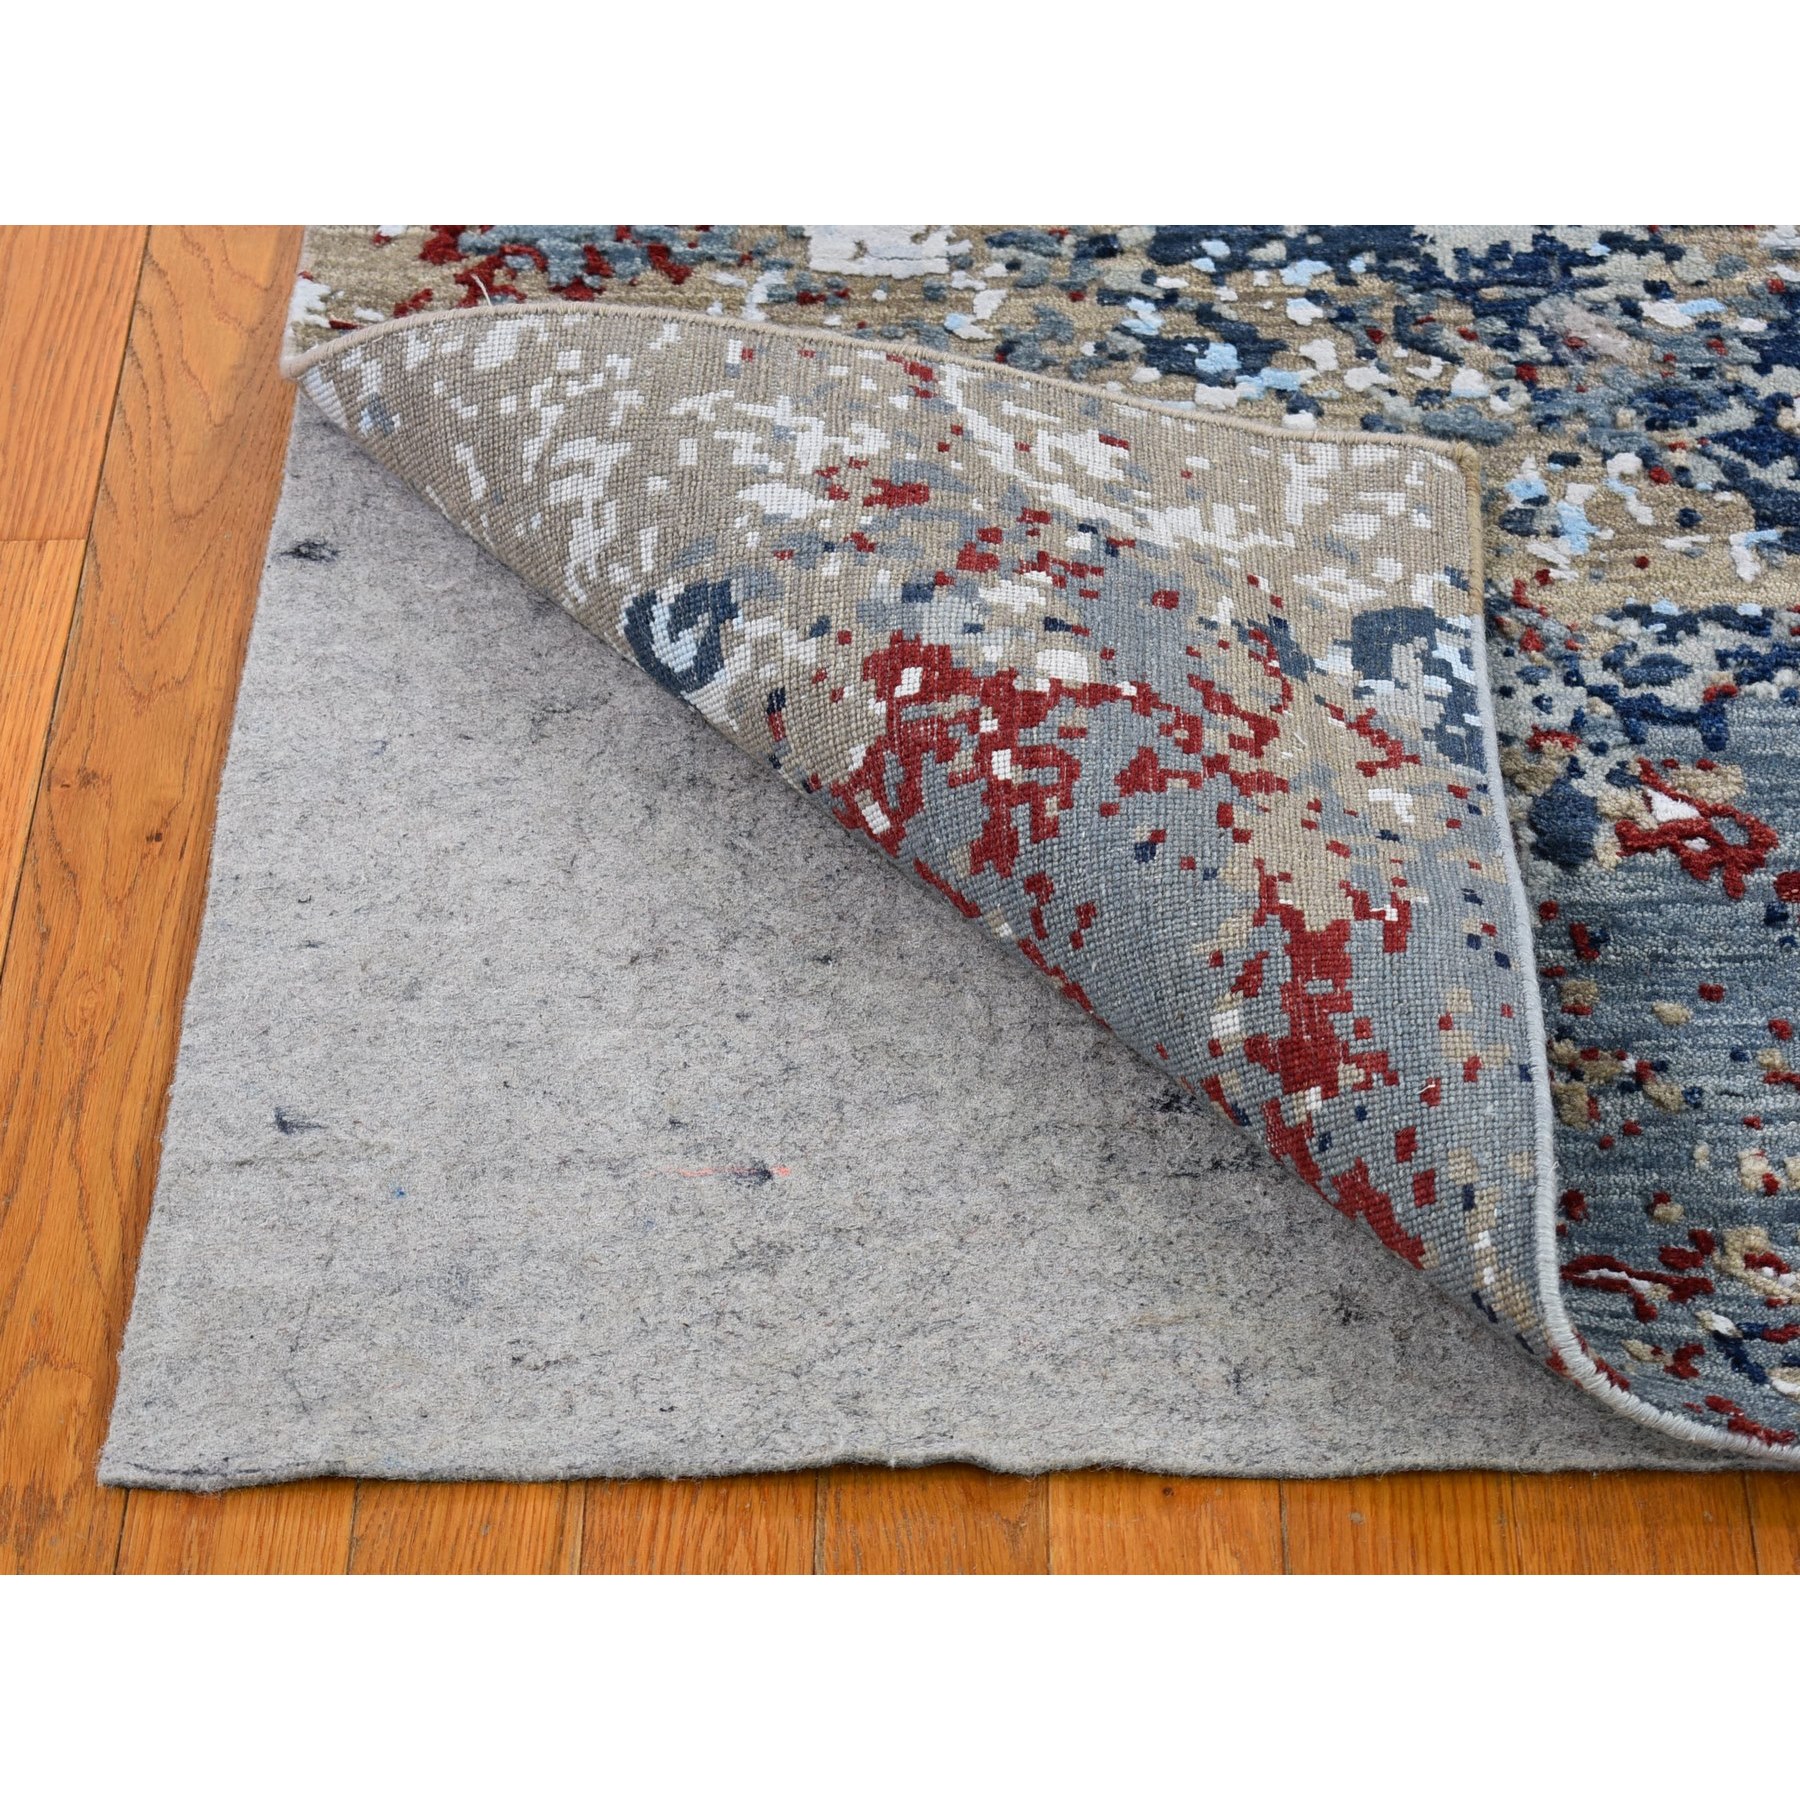 4'1"x6'1" Navy Blue Hi-Low Pile Denser Weave Hand Woven Abstract with Galaxy Design Wool and Silk Oriental Rug 